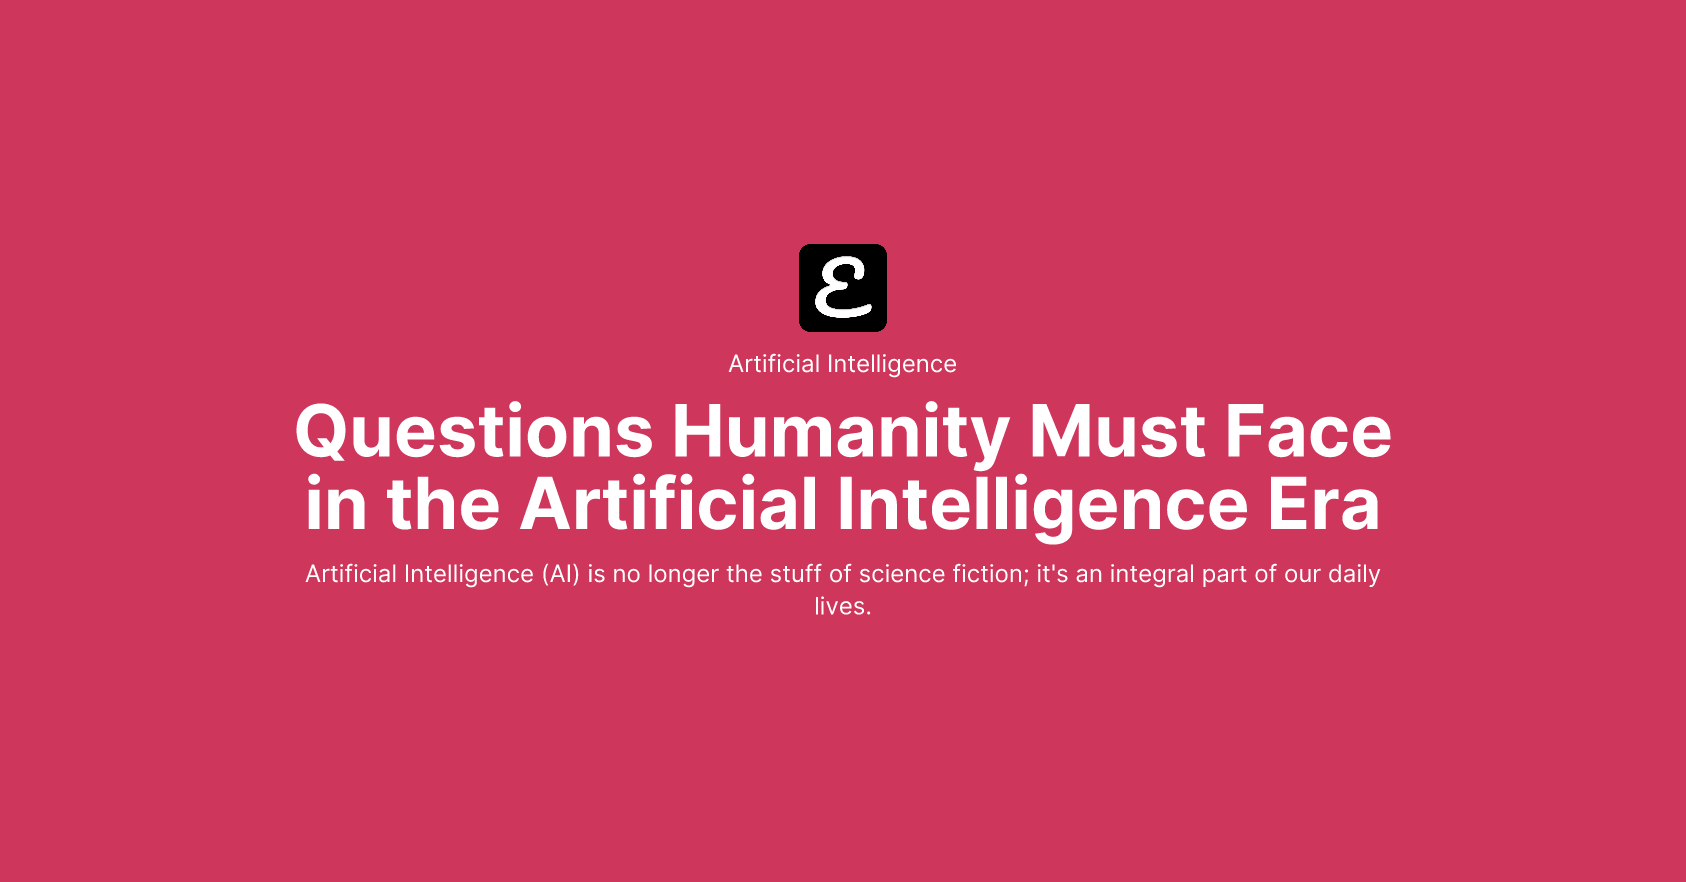 Questions Humanity Must Face in the Artificial Intelligence Era by Eric David Smith